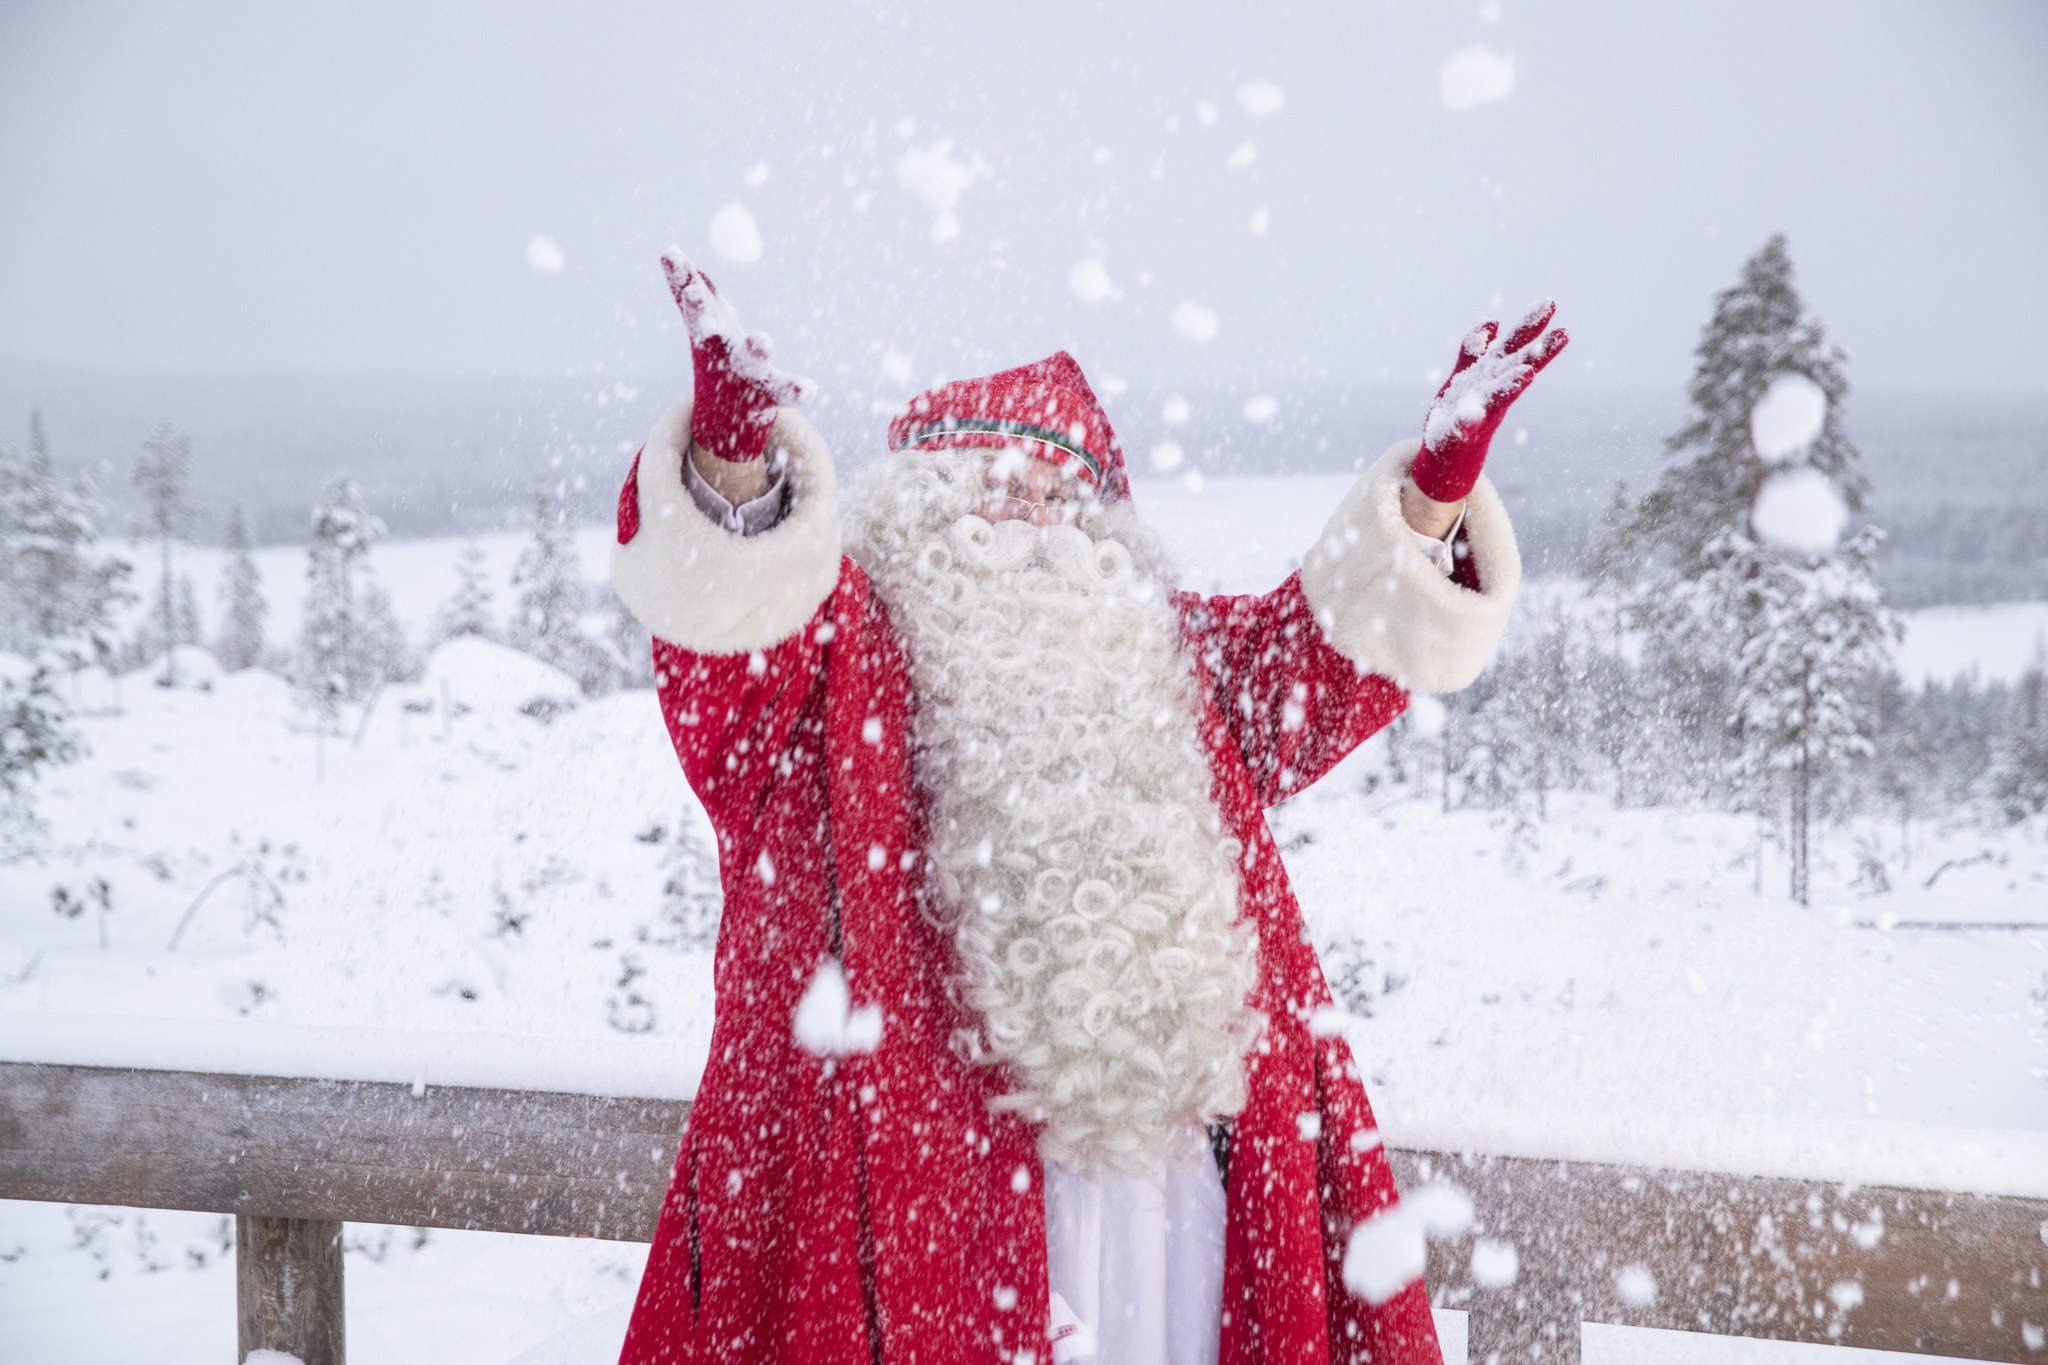 cheapest way to visit santa in lapland